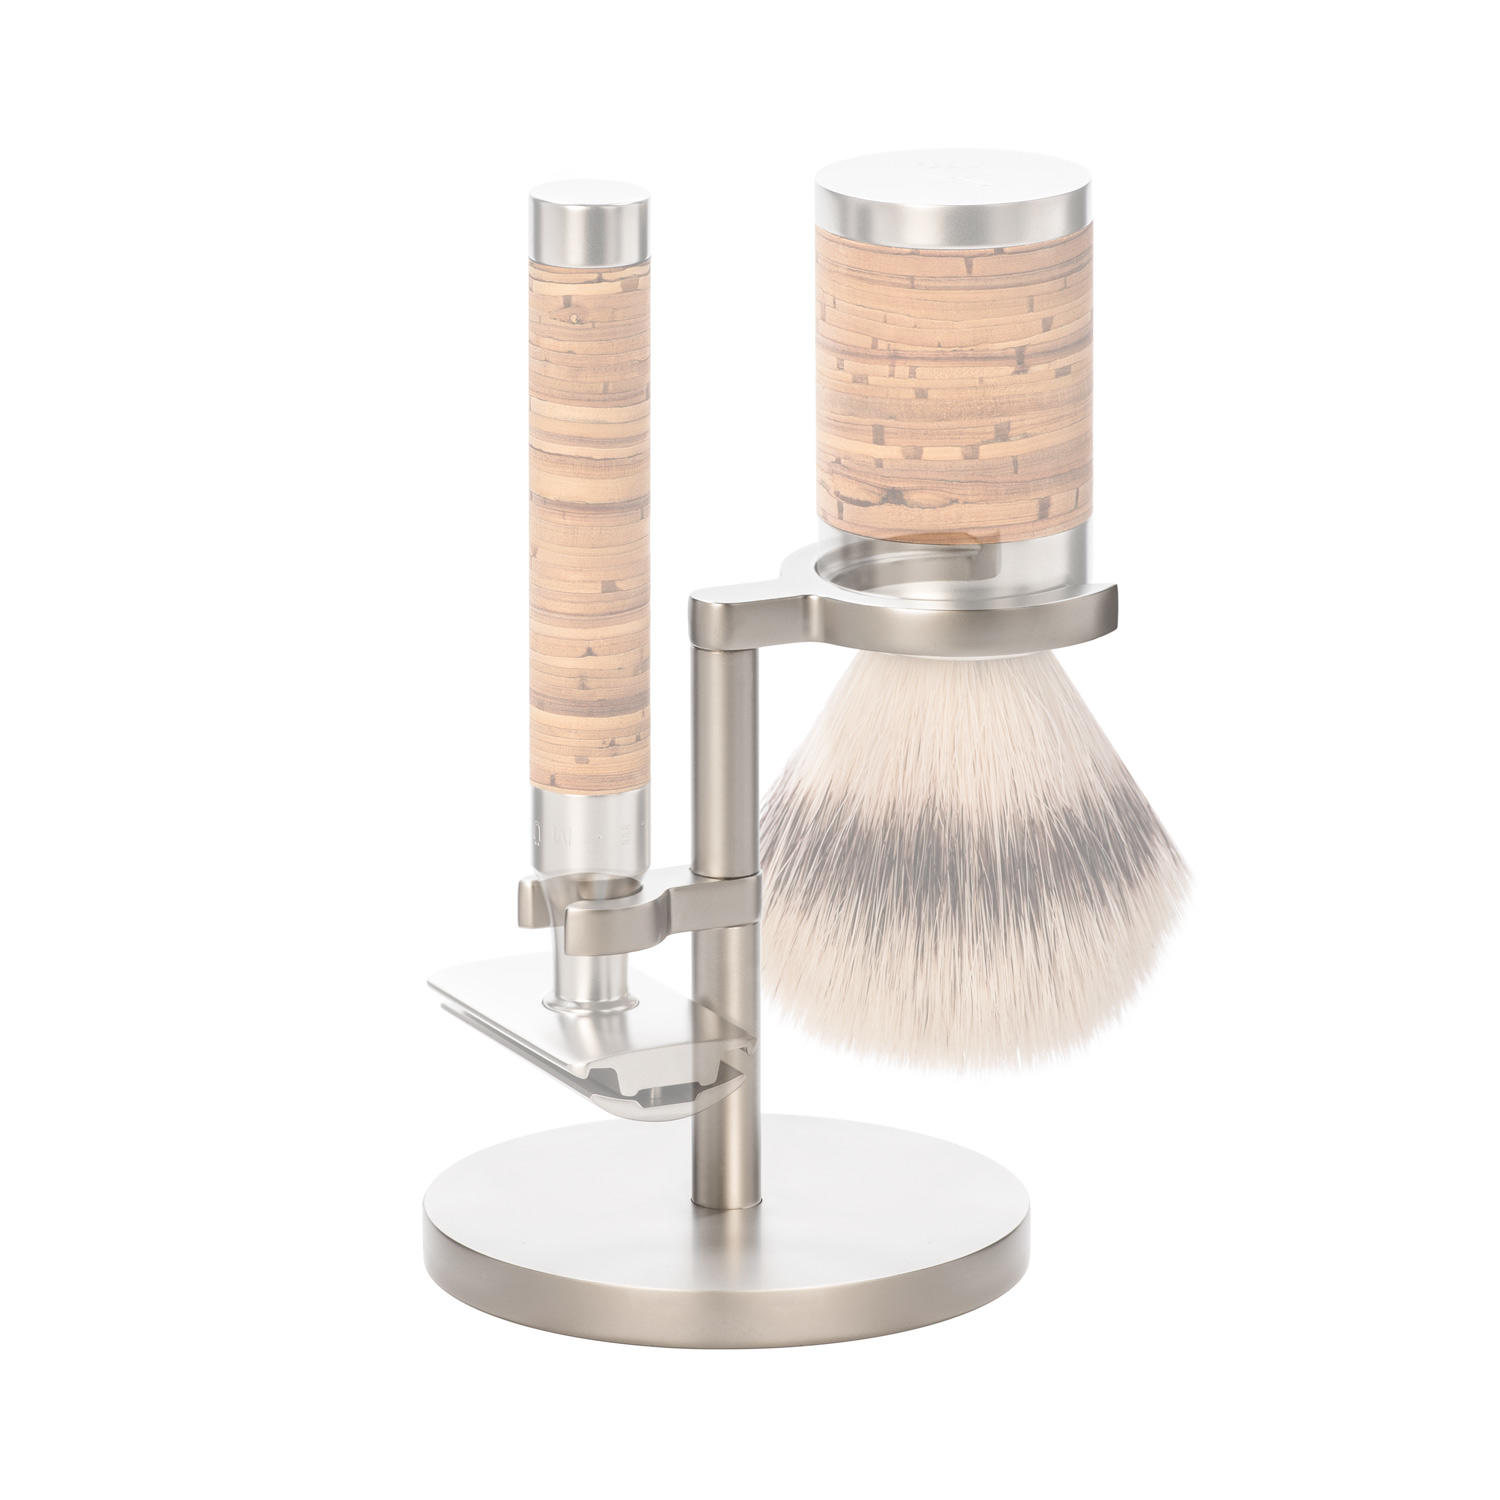 MUHLE ROCCA Matt Stainless Steel Shaving Set Stand for ROCCA Series